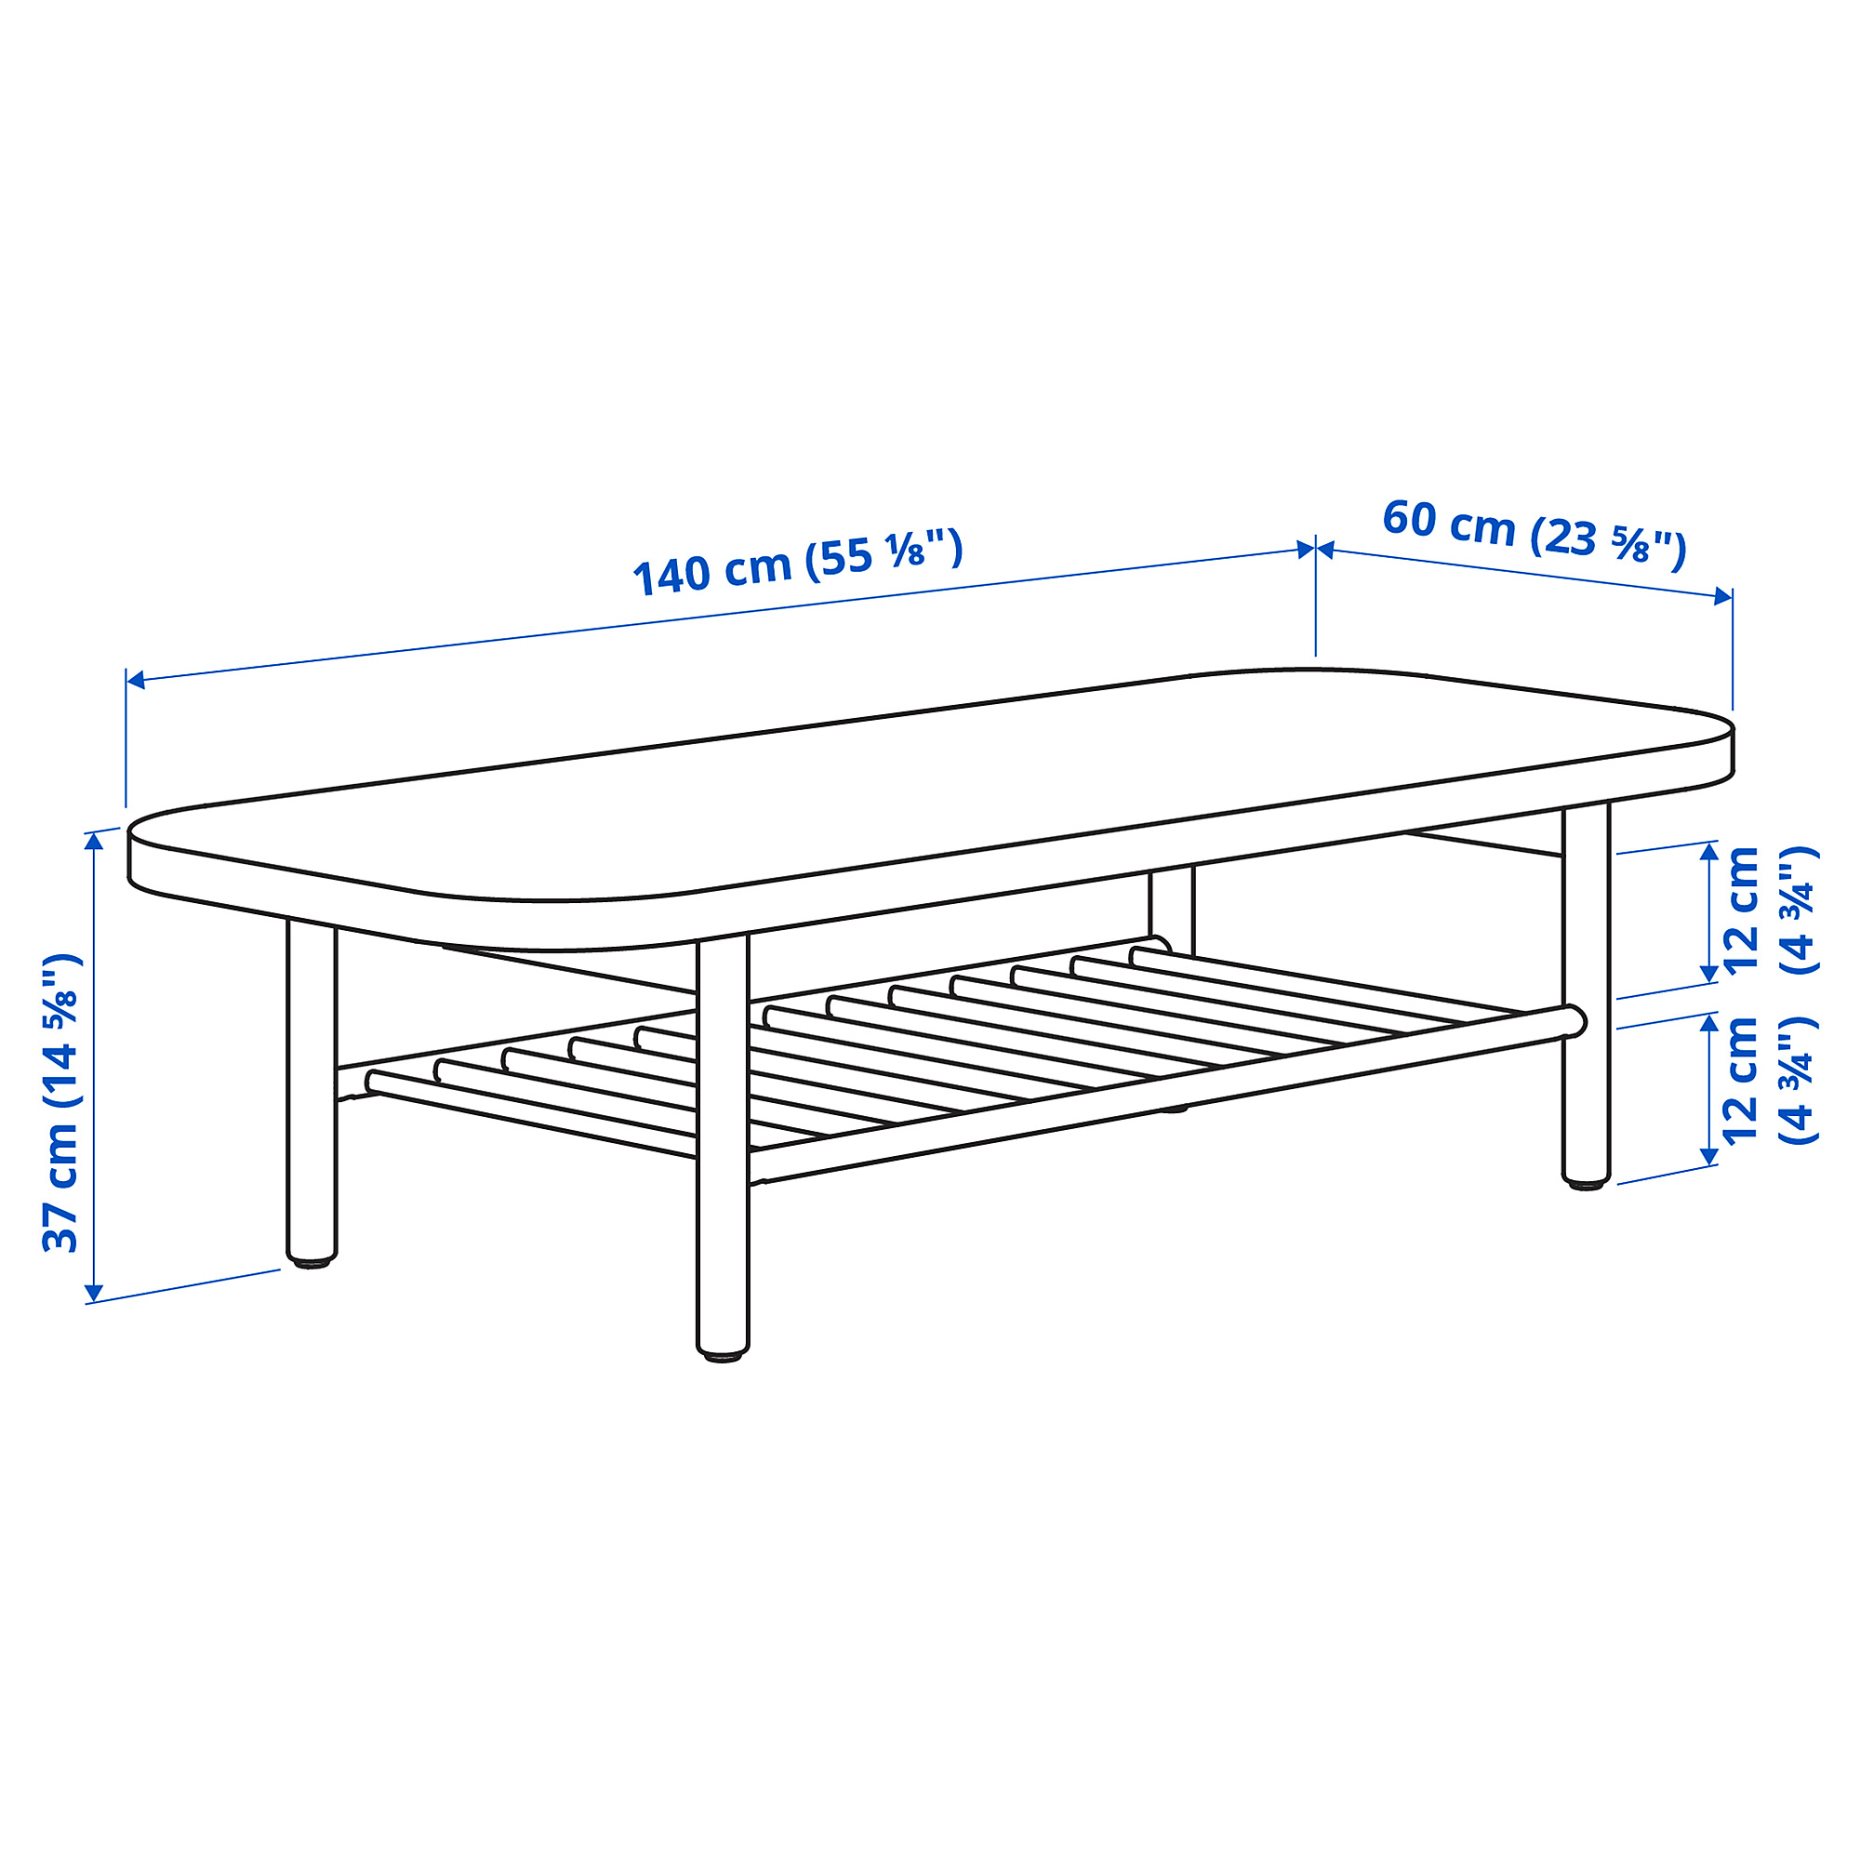 LISTERBY, coffee table, 140x60 cm, 905.622.46